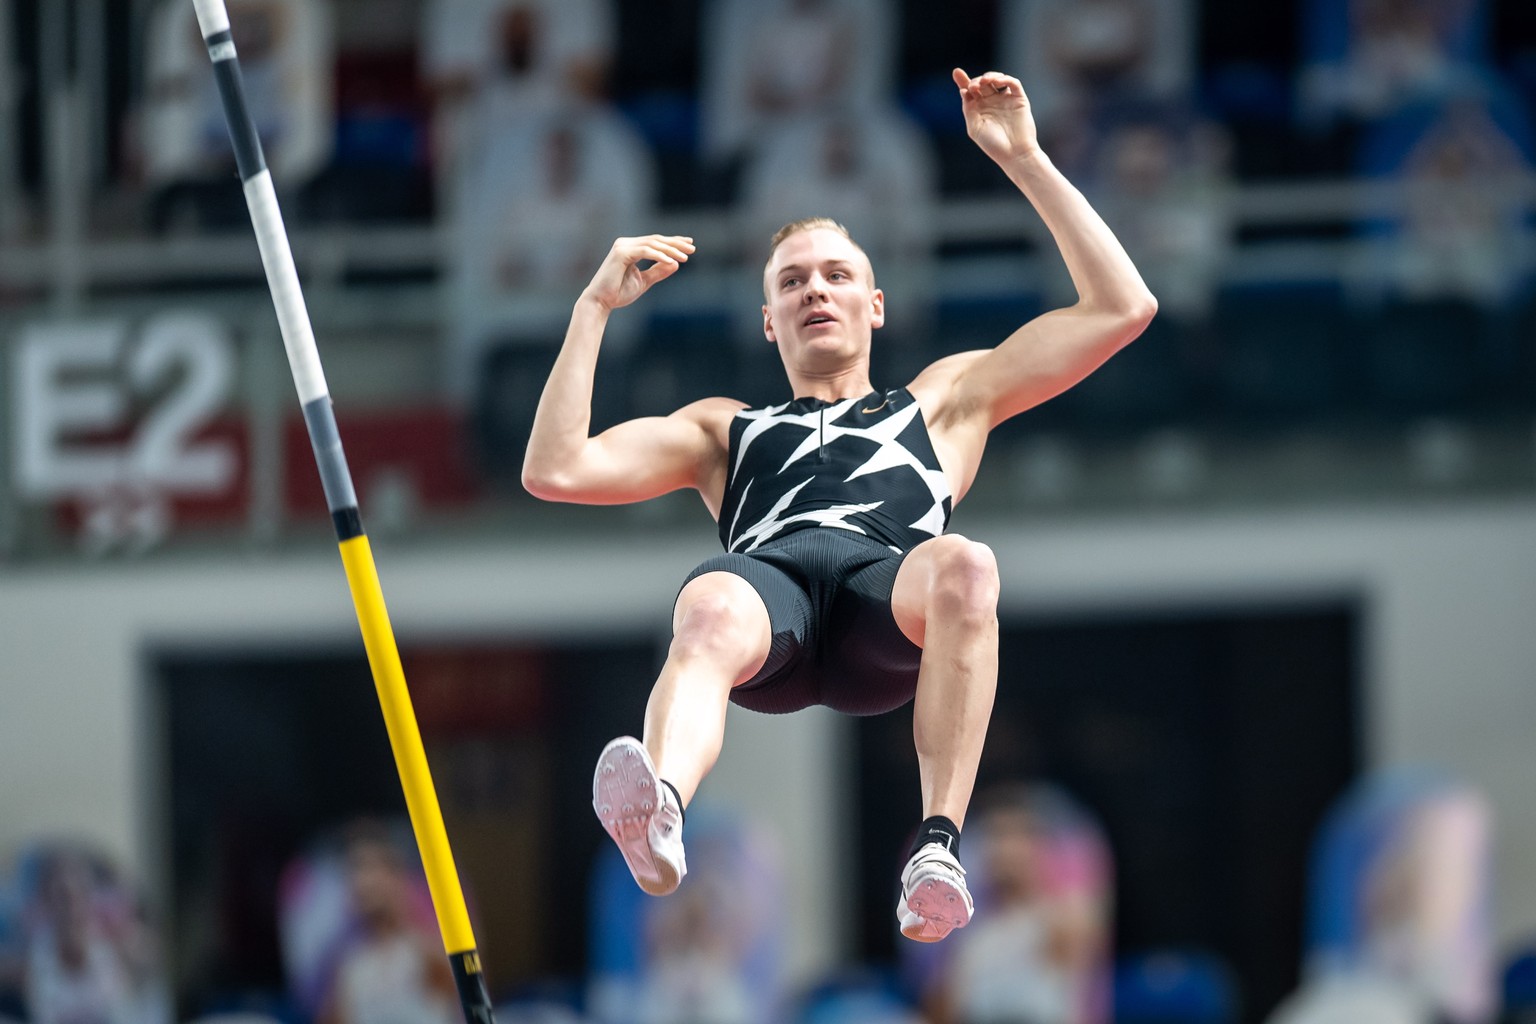 epa09019910 Sam Kendricks of the USA competes in the men's Pole Vault during the Copernicus Cup 2021 indoor athletics meeting in Torun, Poland, 17 February 2021. EPA/Tytus Zmijewski POLAND OUT